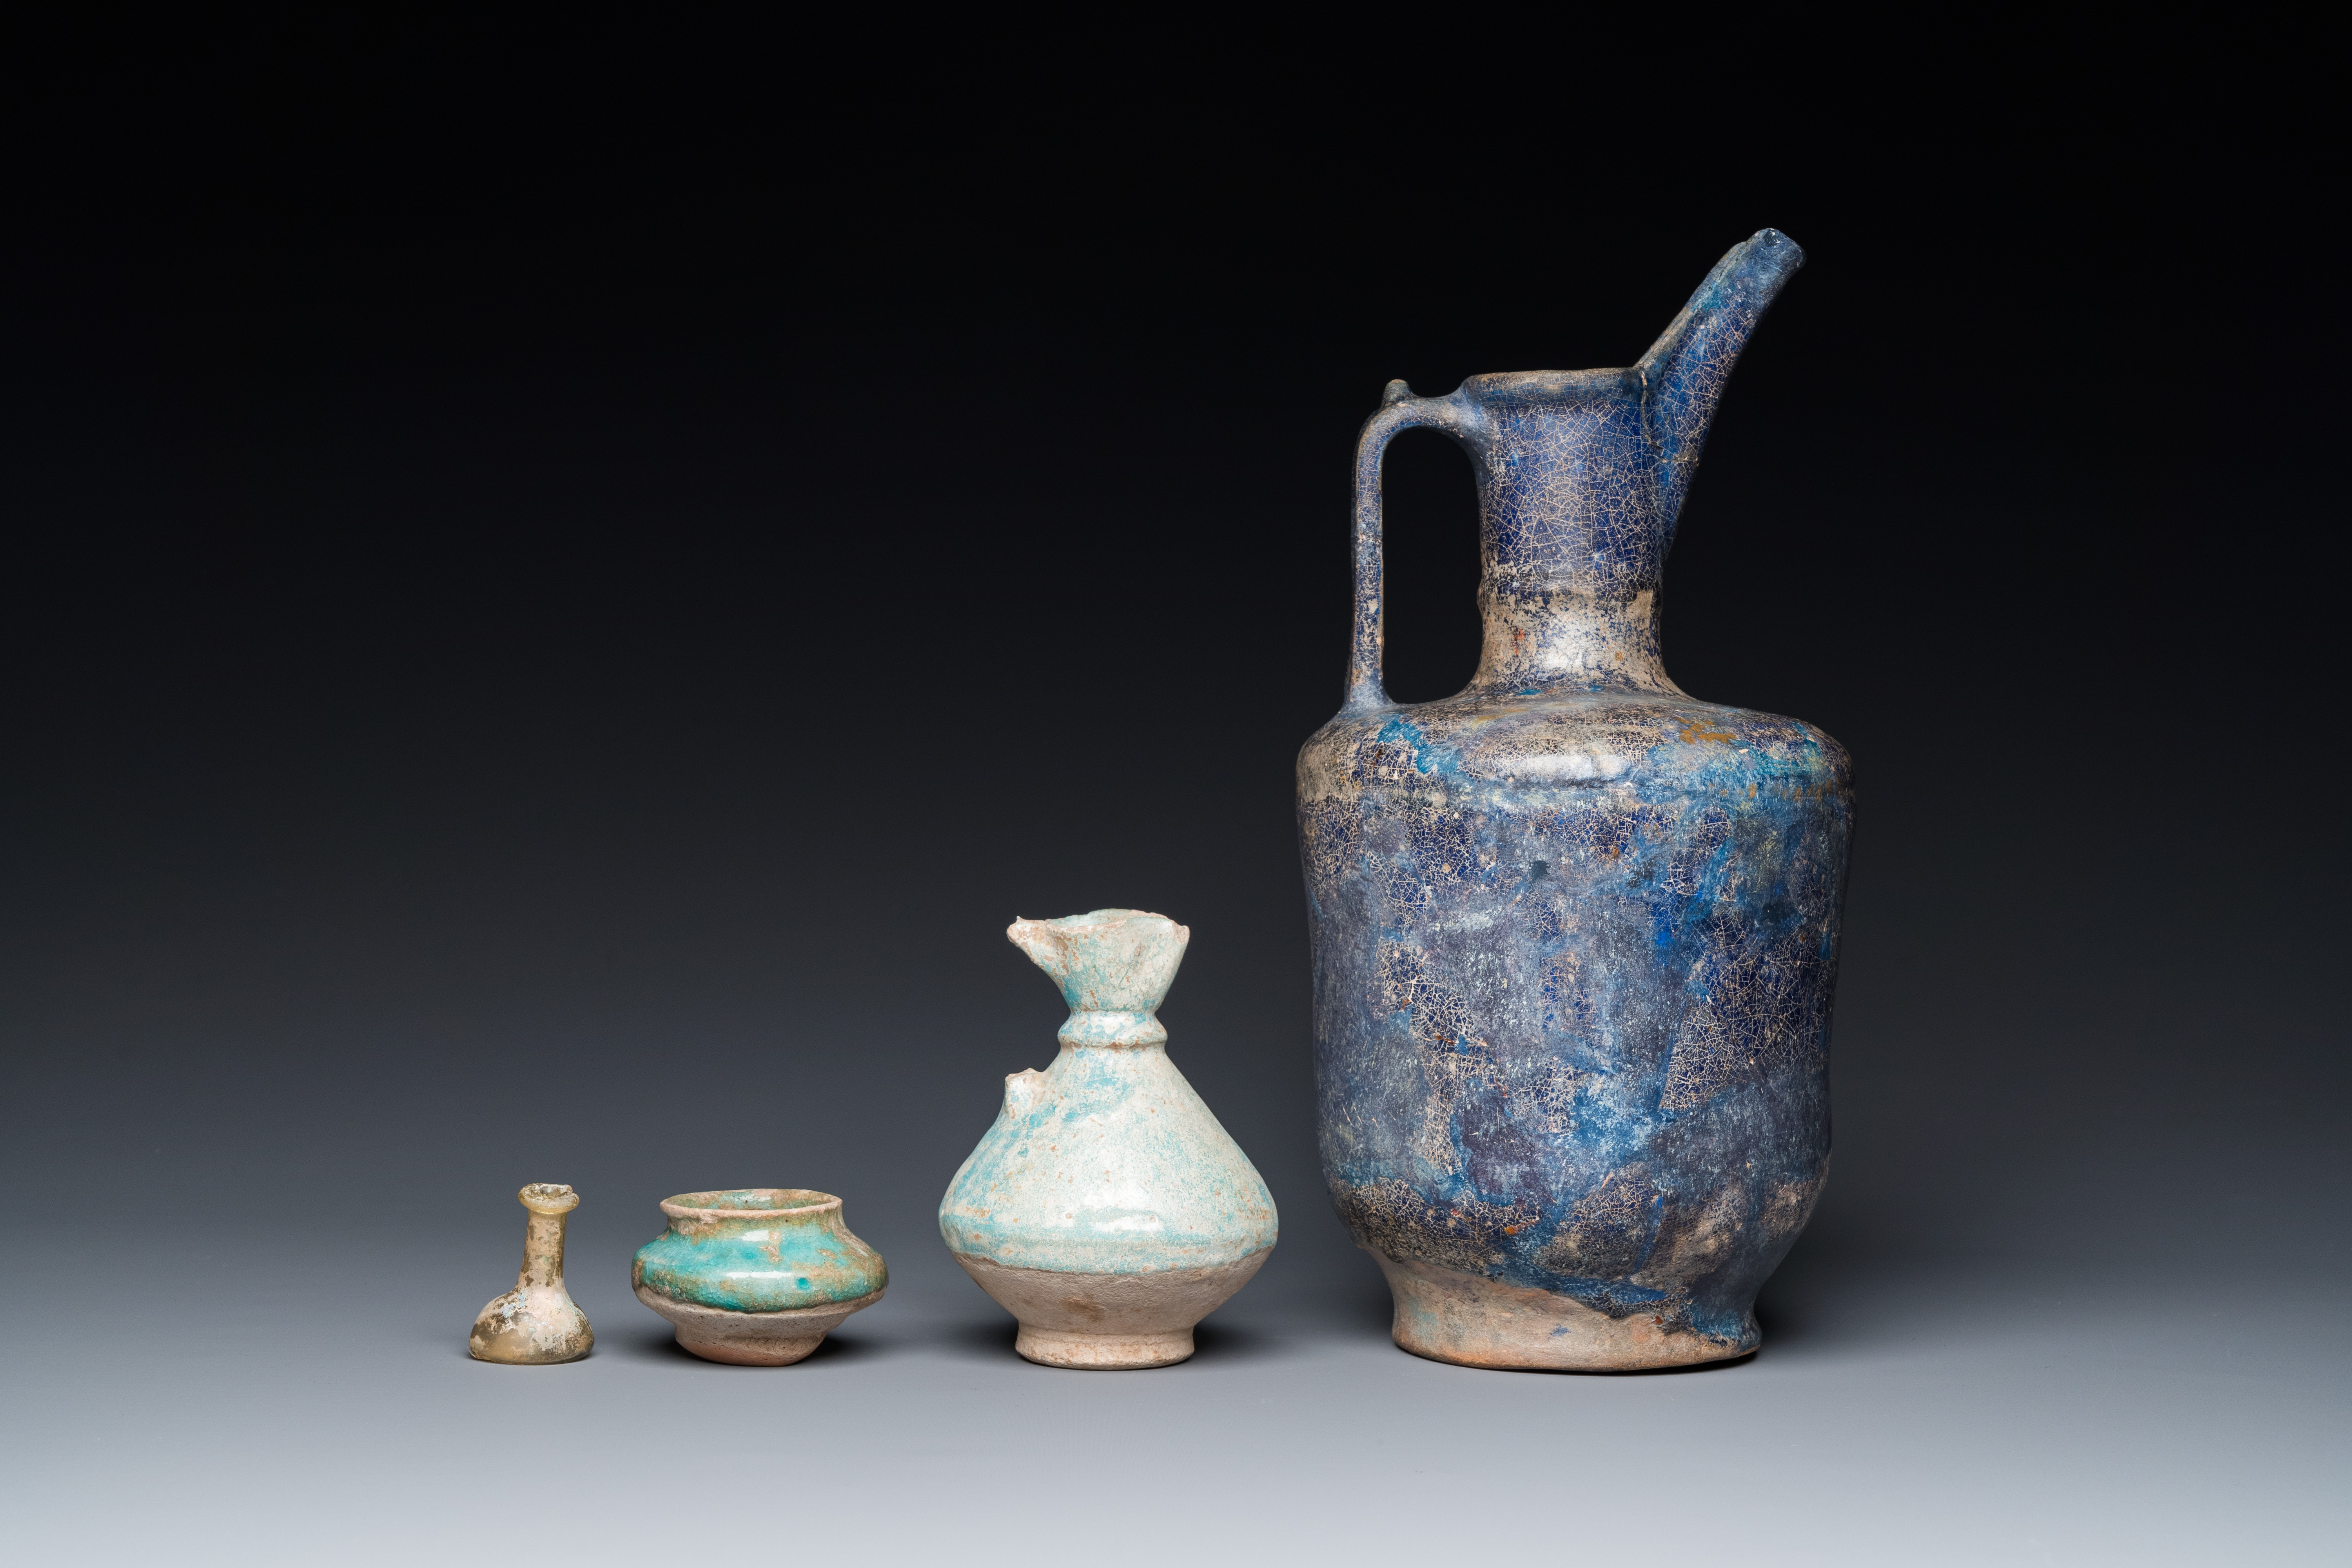 Twelve Ottoman and Persian pottery wares, 13th C. and later - Image 21 of 34